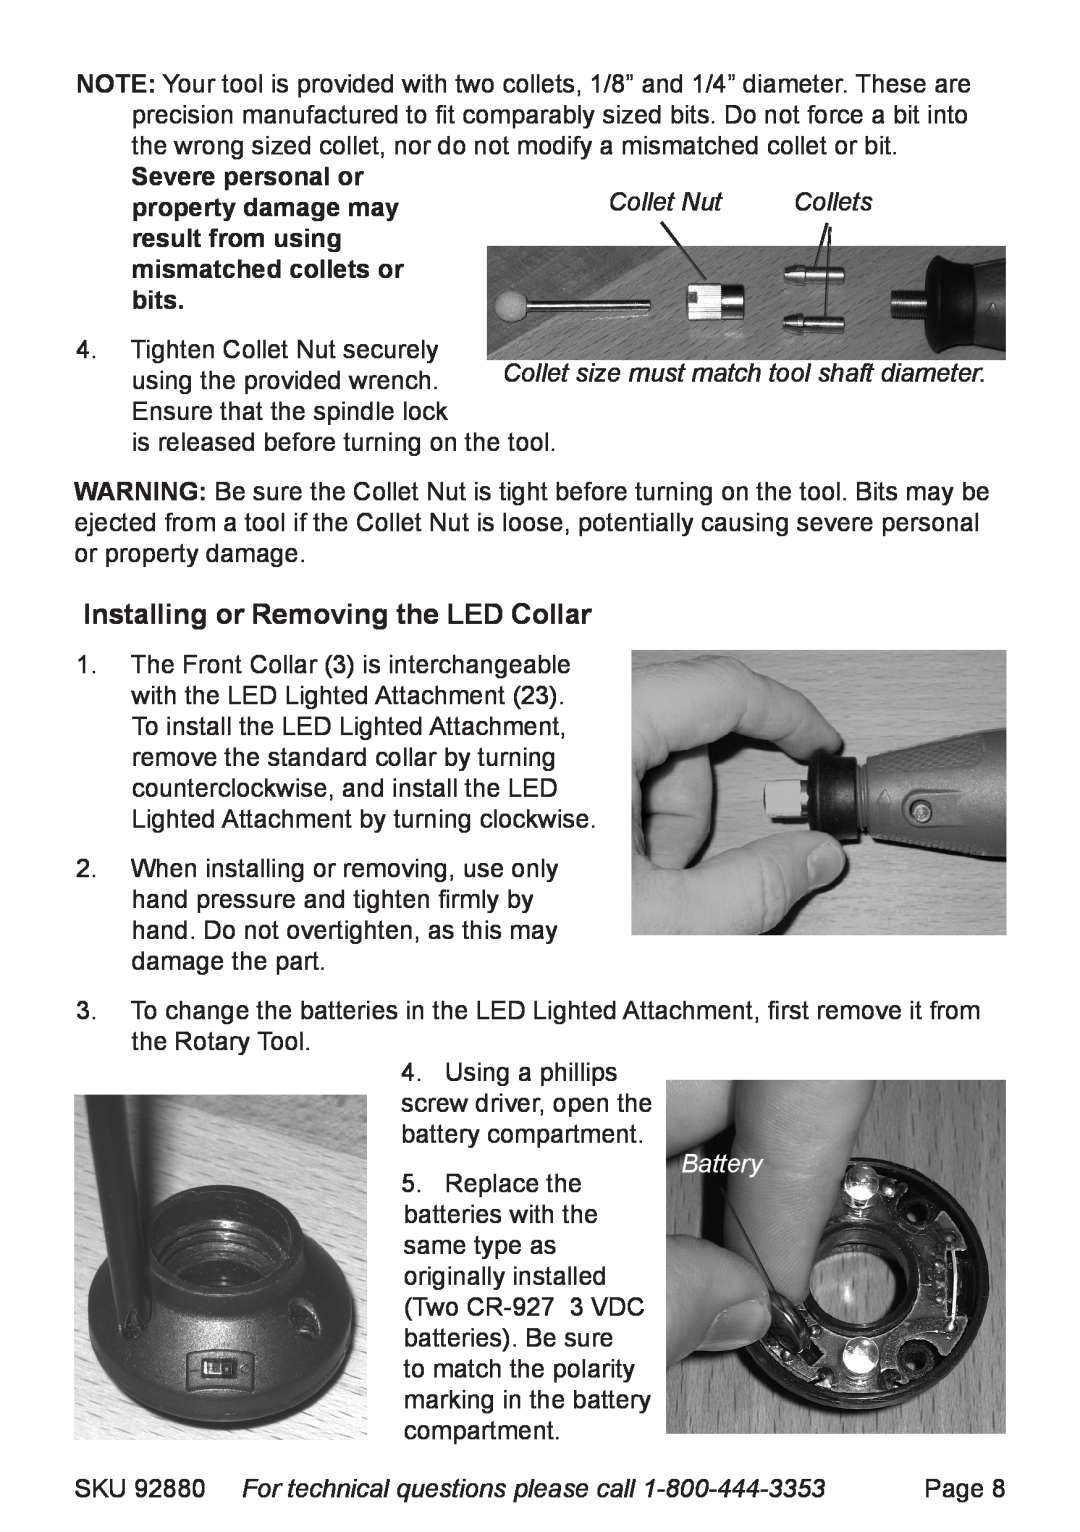 Chicago Electric 92880 Installing or Removing the LED Collar, Battery, Severe personal or, mismatched collets or bits 